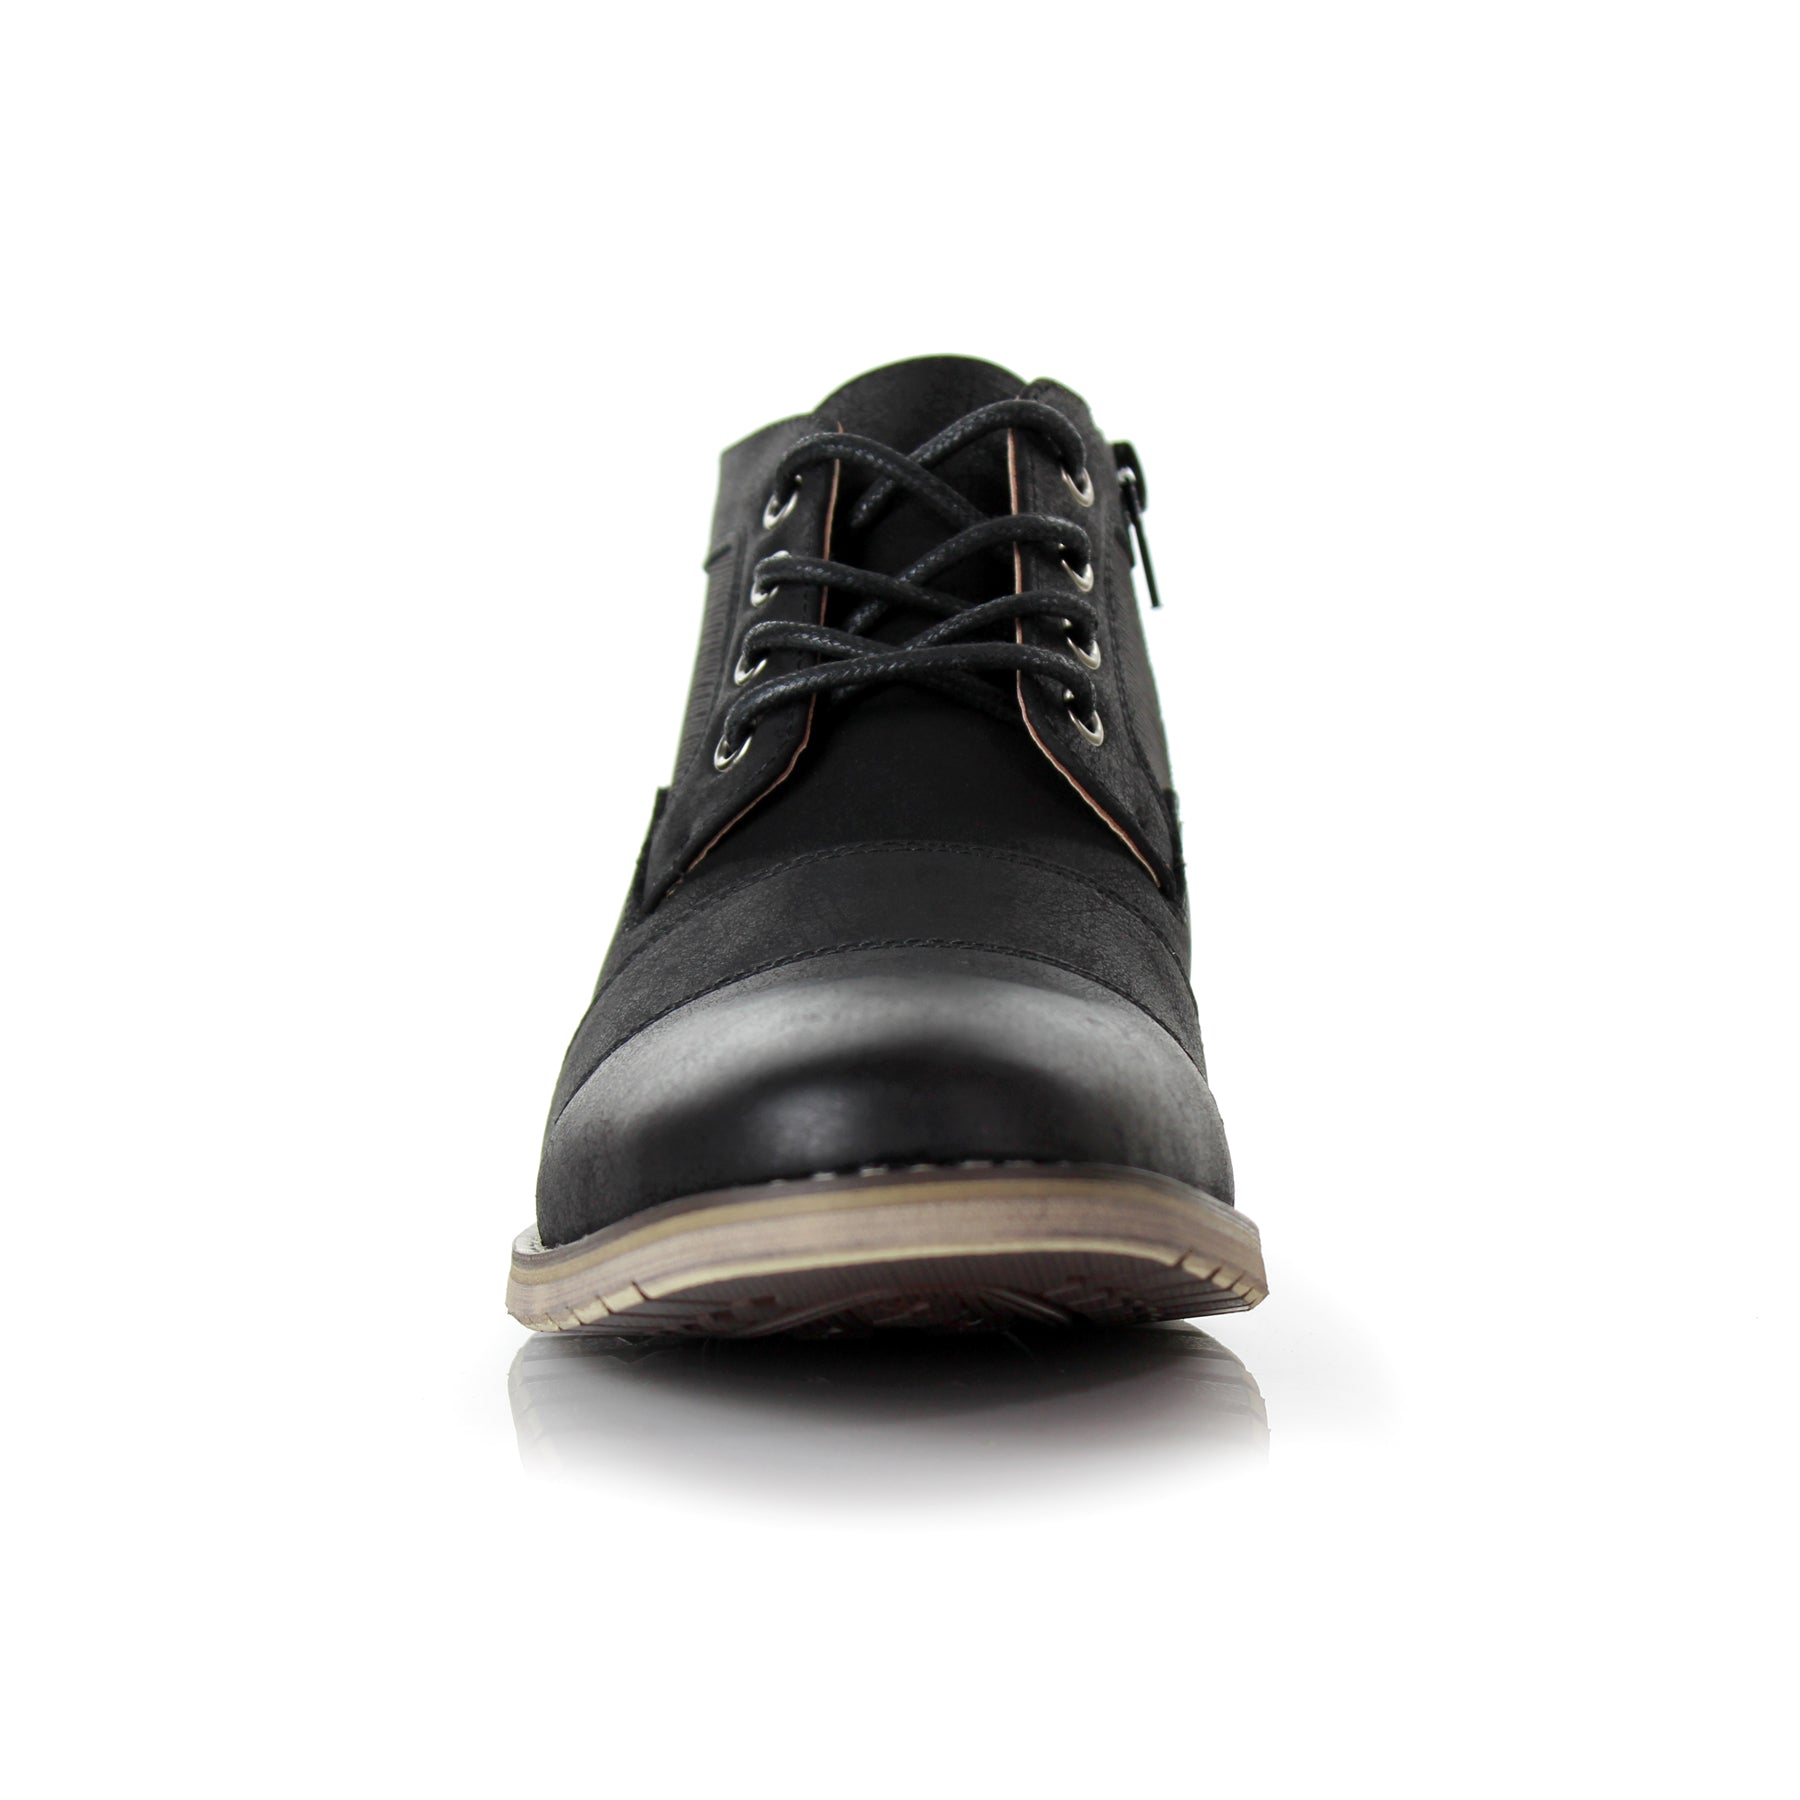 Mid-Top Zipper Boots | Blaine by Ferro Aldo | Conal Footwear | Front Angle View